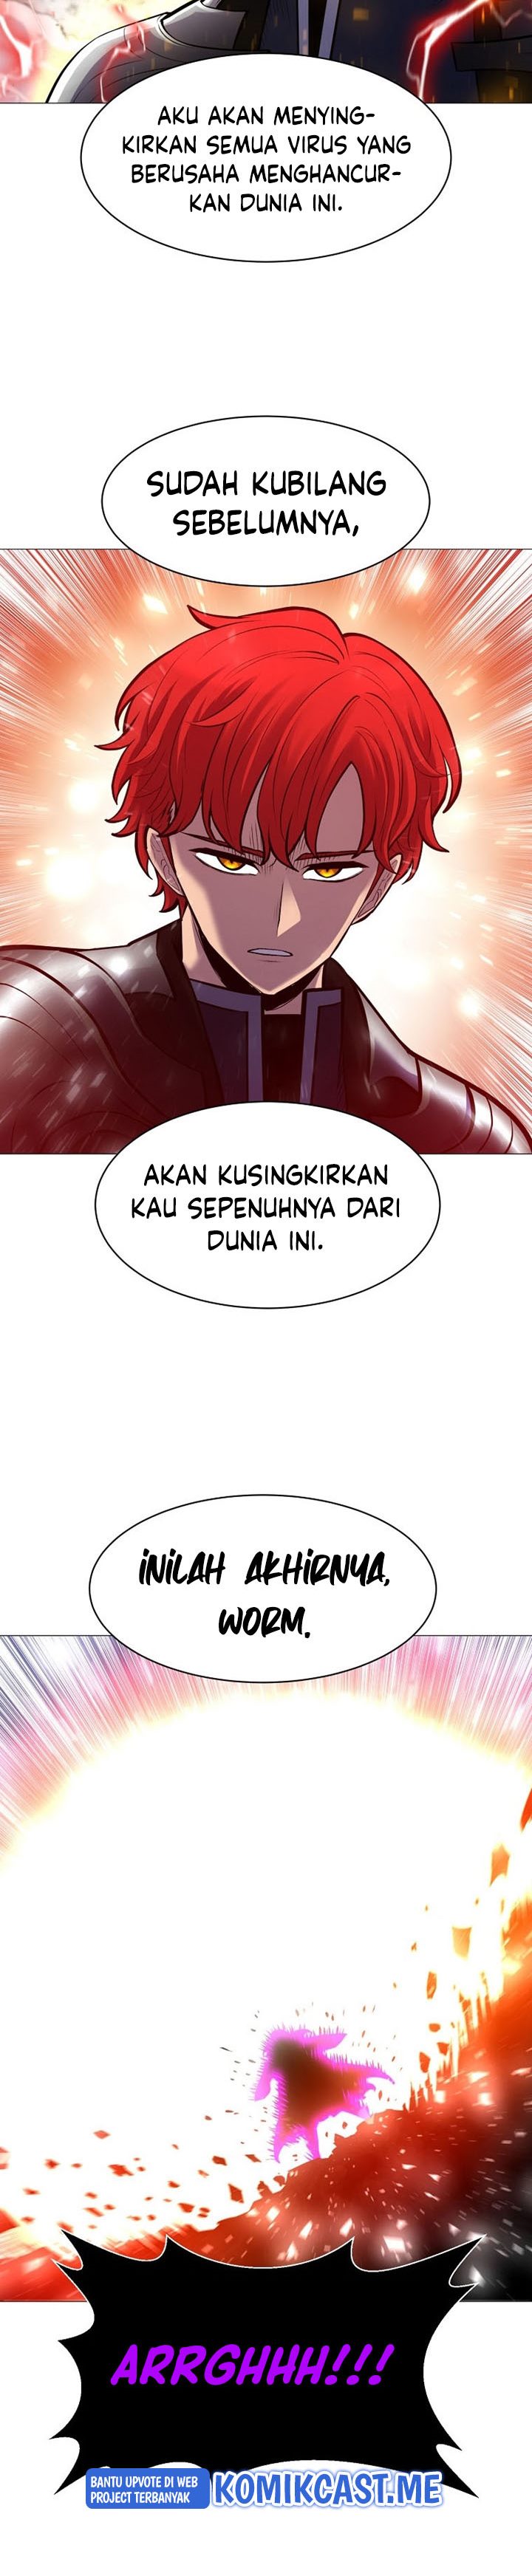 Updater Chapter 92 - 247